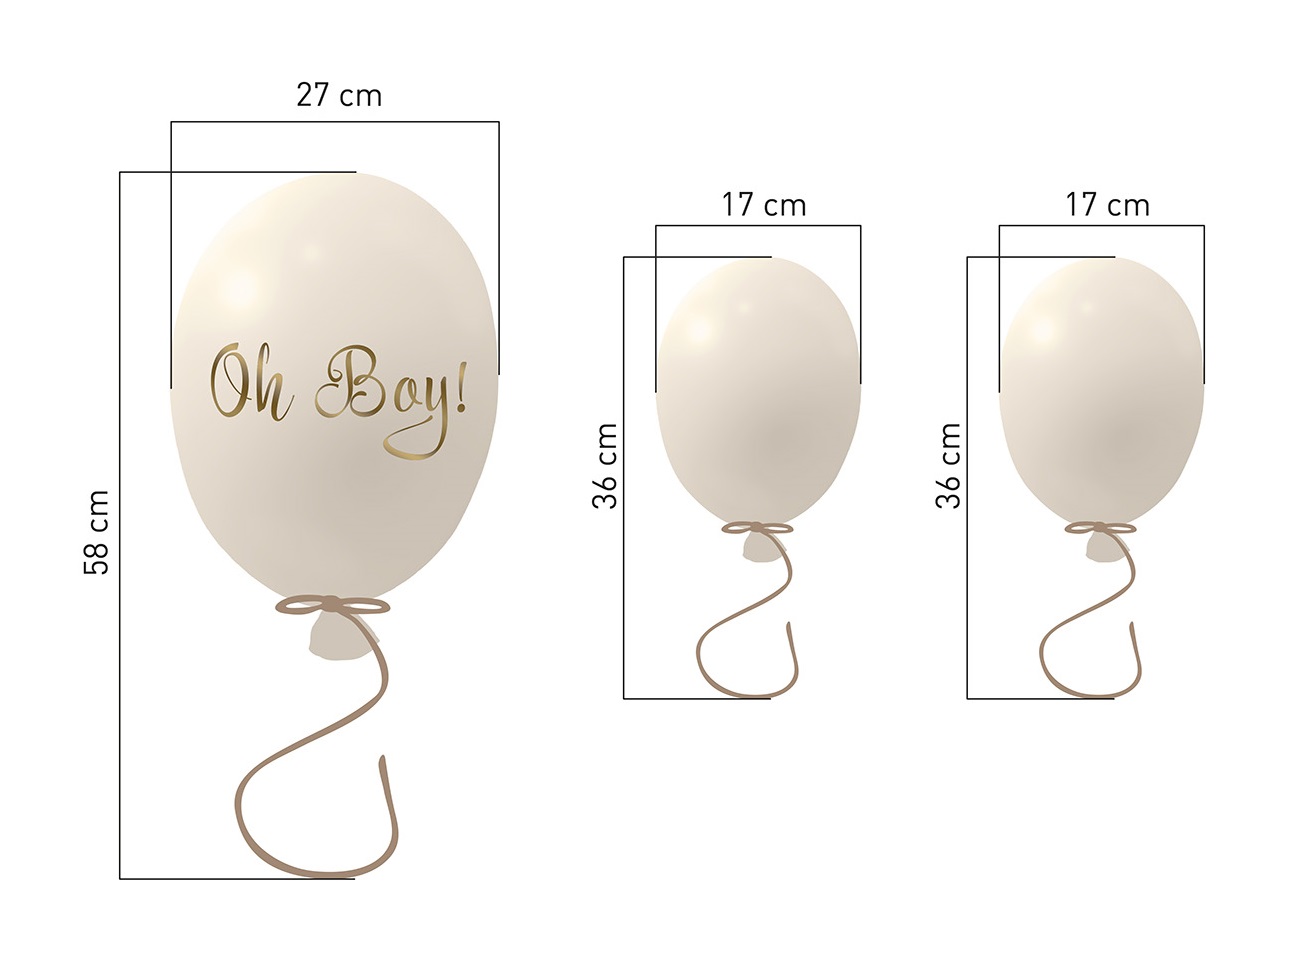 Wall sticker party balloons set of 3, cream Wall sticker party balloons set of 3, cream